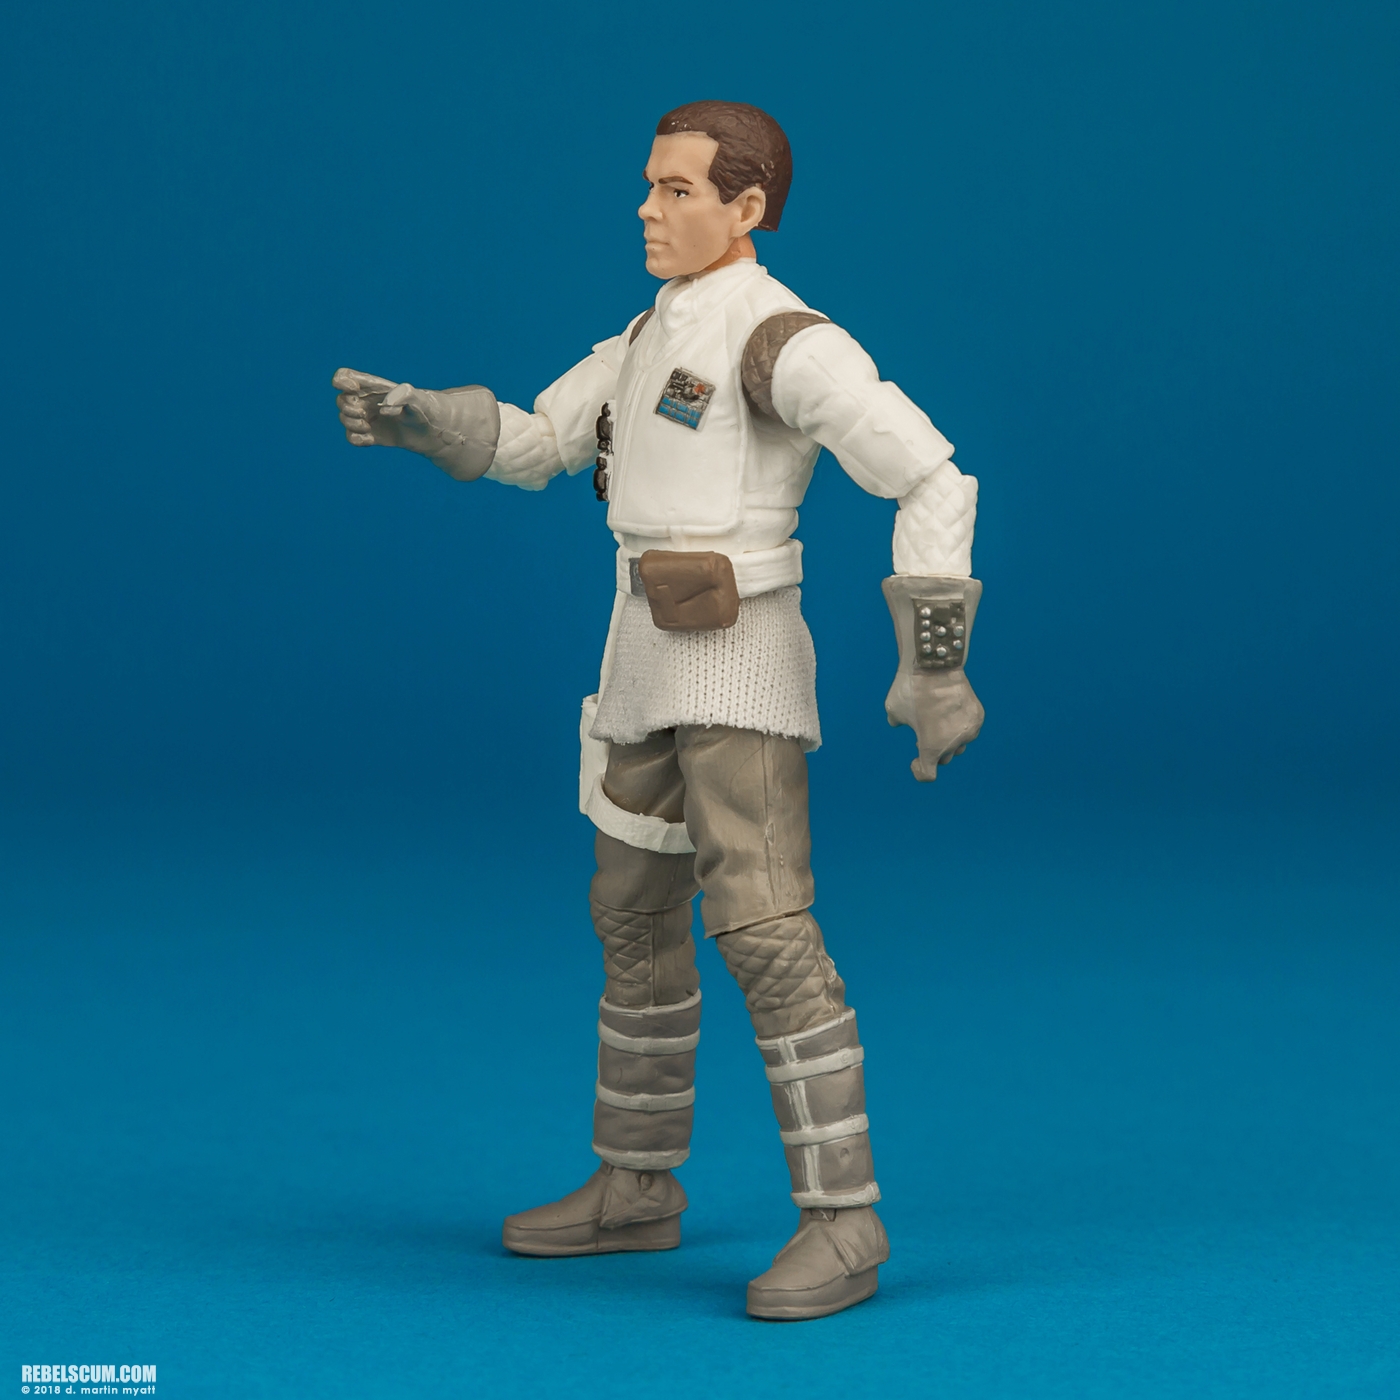 VC120-Rebel-Soldier-Hoth-The-Vintage-Collection-Hasbro-003.jpg